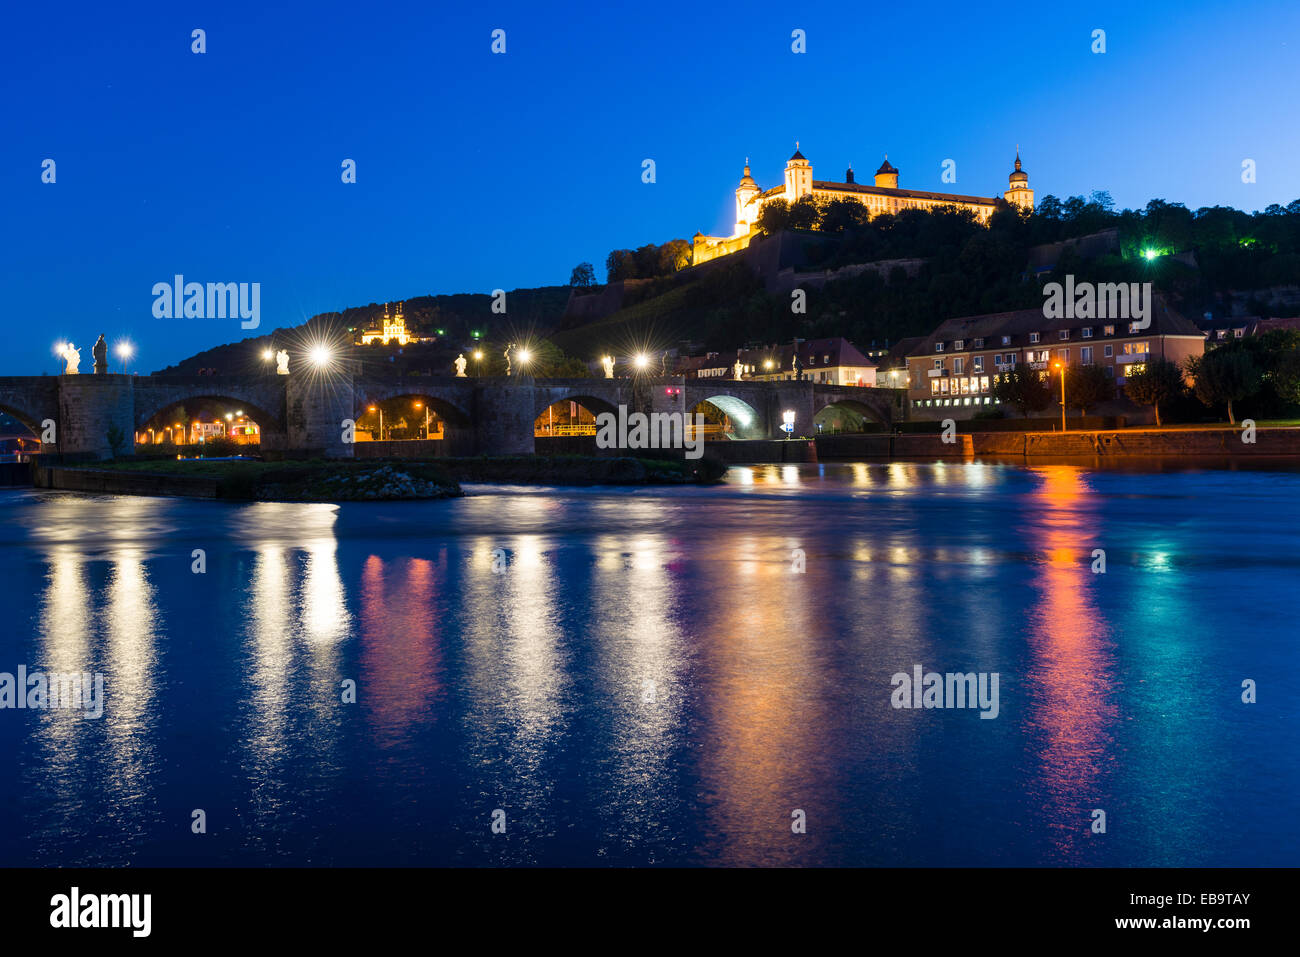 The illuminated Festung Marienberg castle located on a hill above the town, the Alte Mainbrücke bridge crossing the river Main Stock Photo